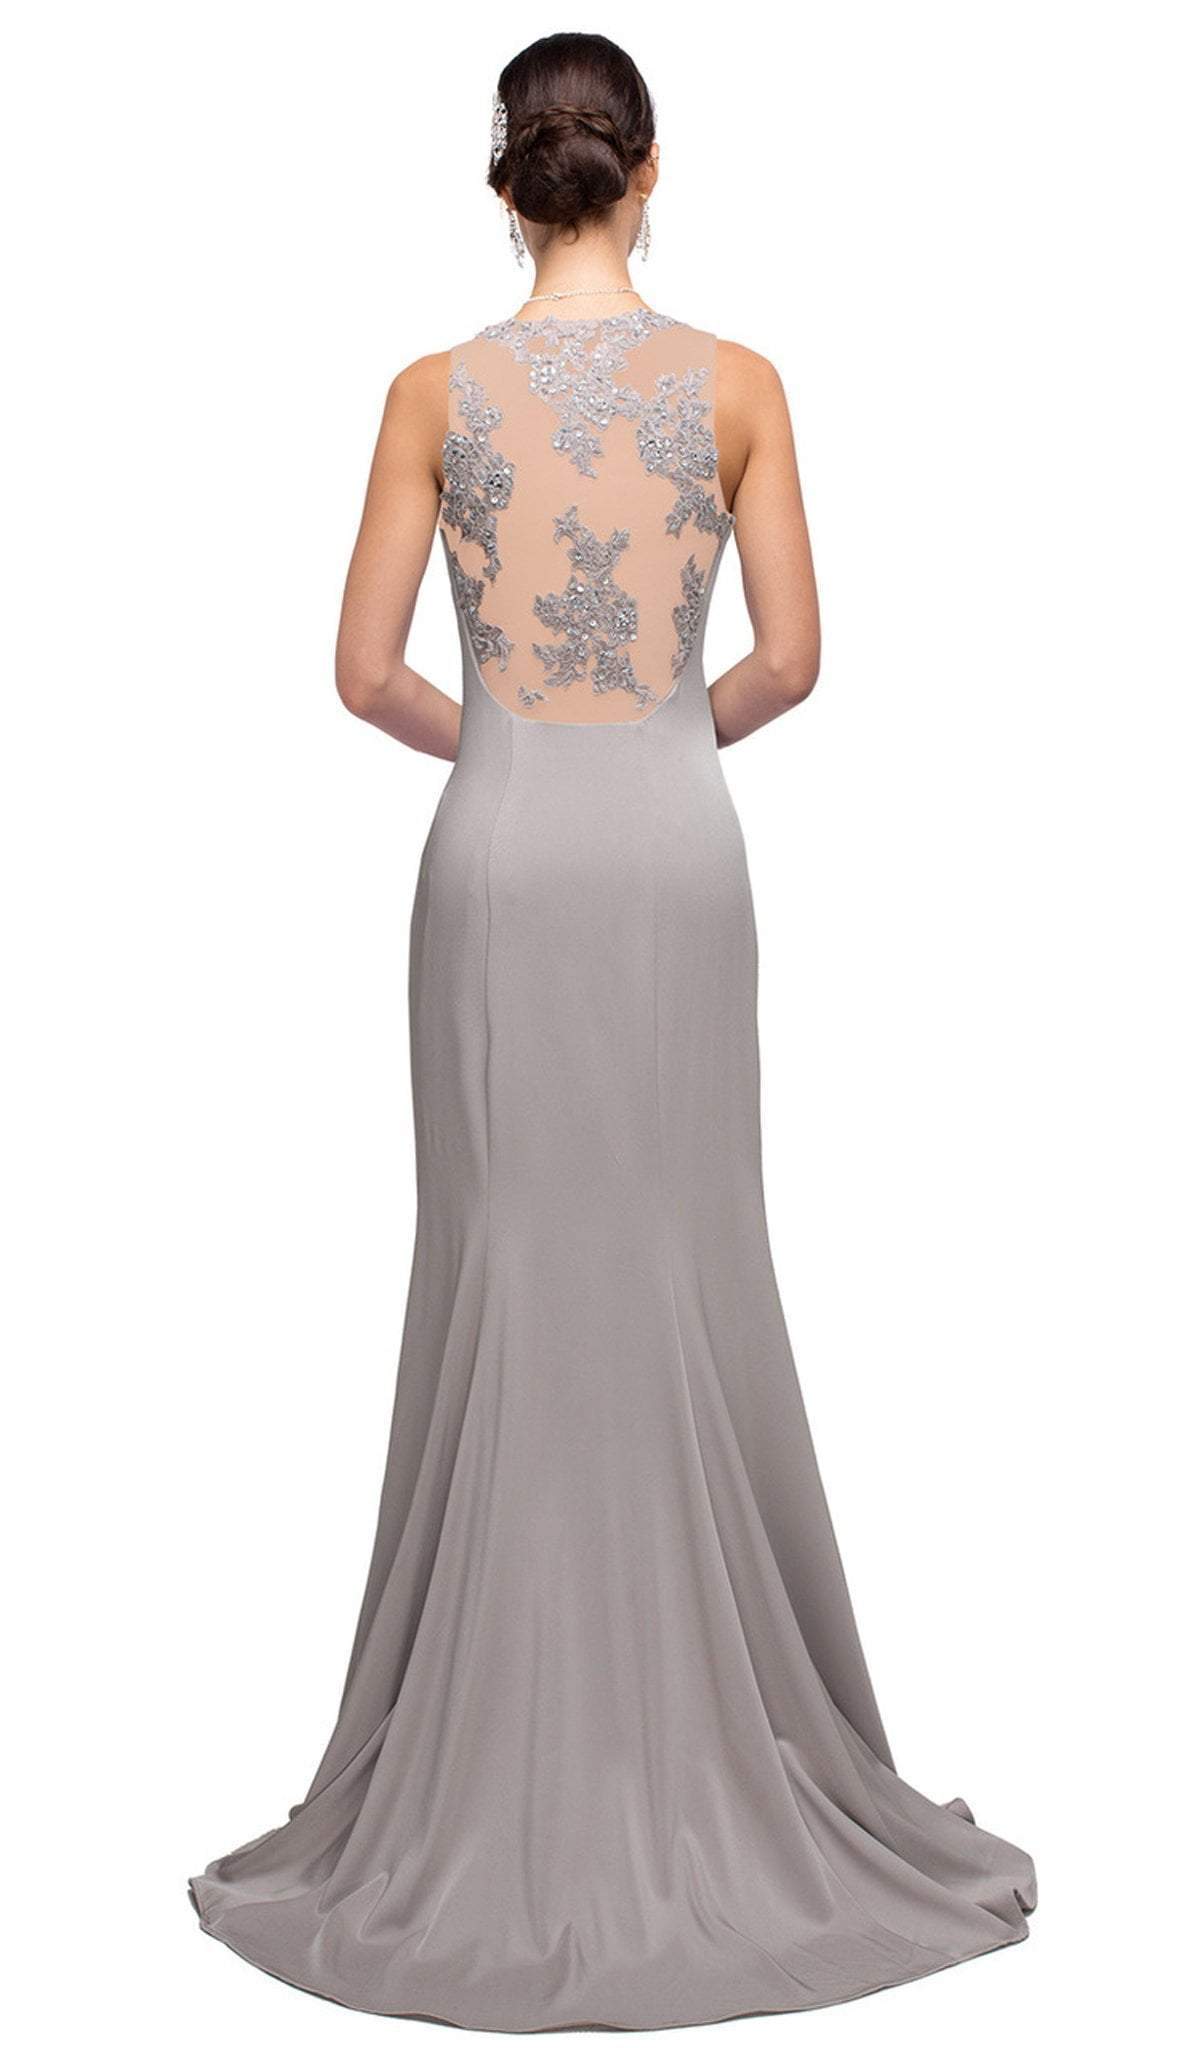 Dancing Queen - 9709 Sheer Lace Applique Back Long Prom Dress Special Occasion Dress